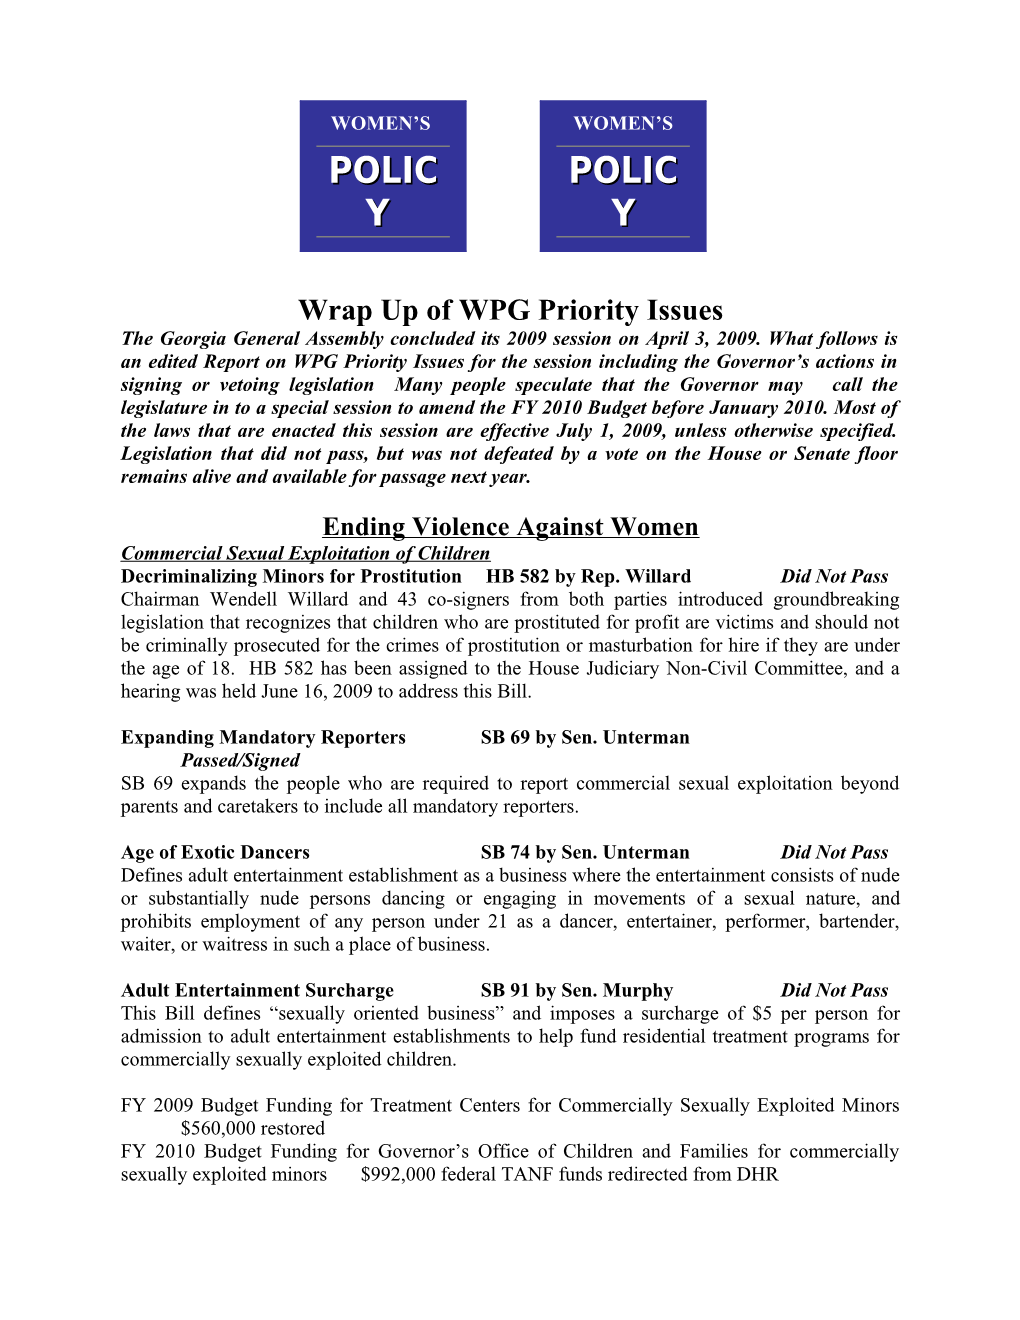 Wrap up of WPG Priority Issues